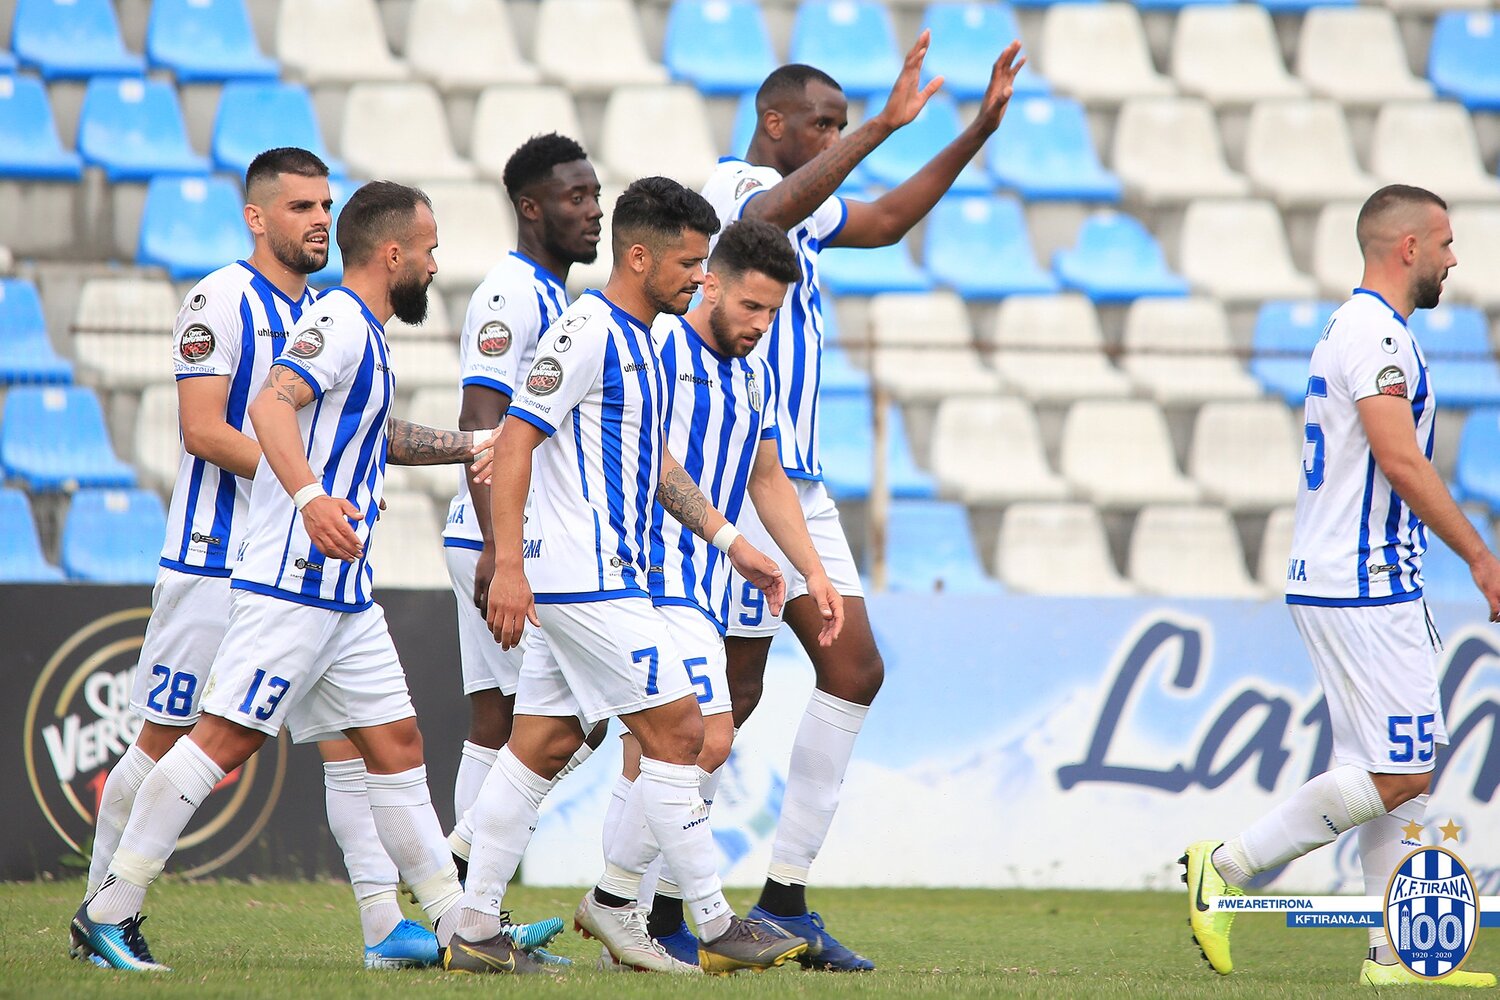 KF Tirana: The return of the most unlucky-yet-successful team — BabaGol